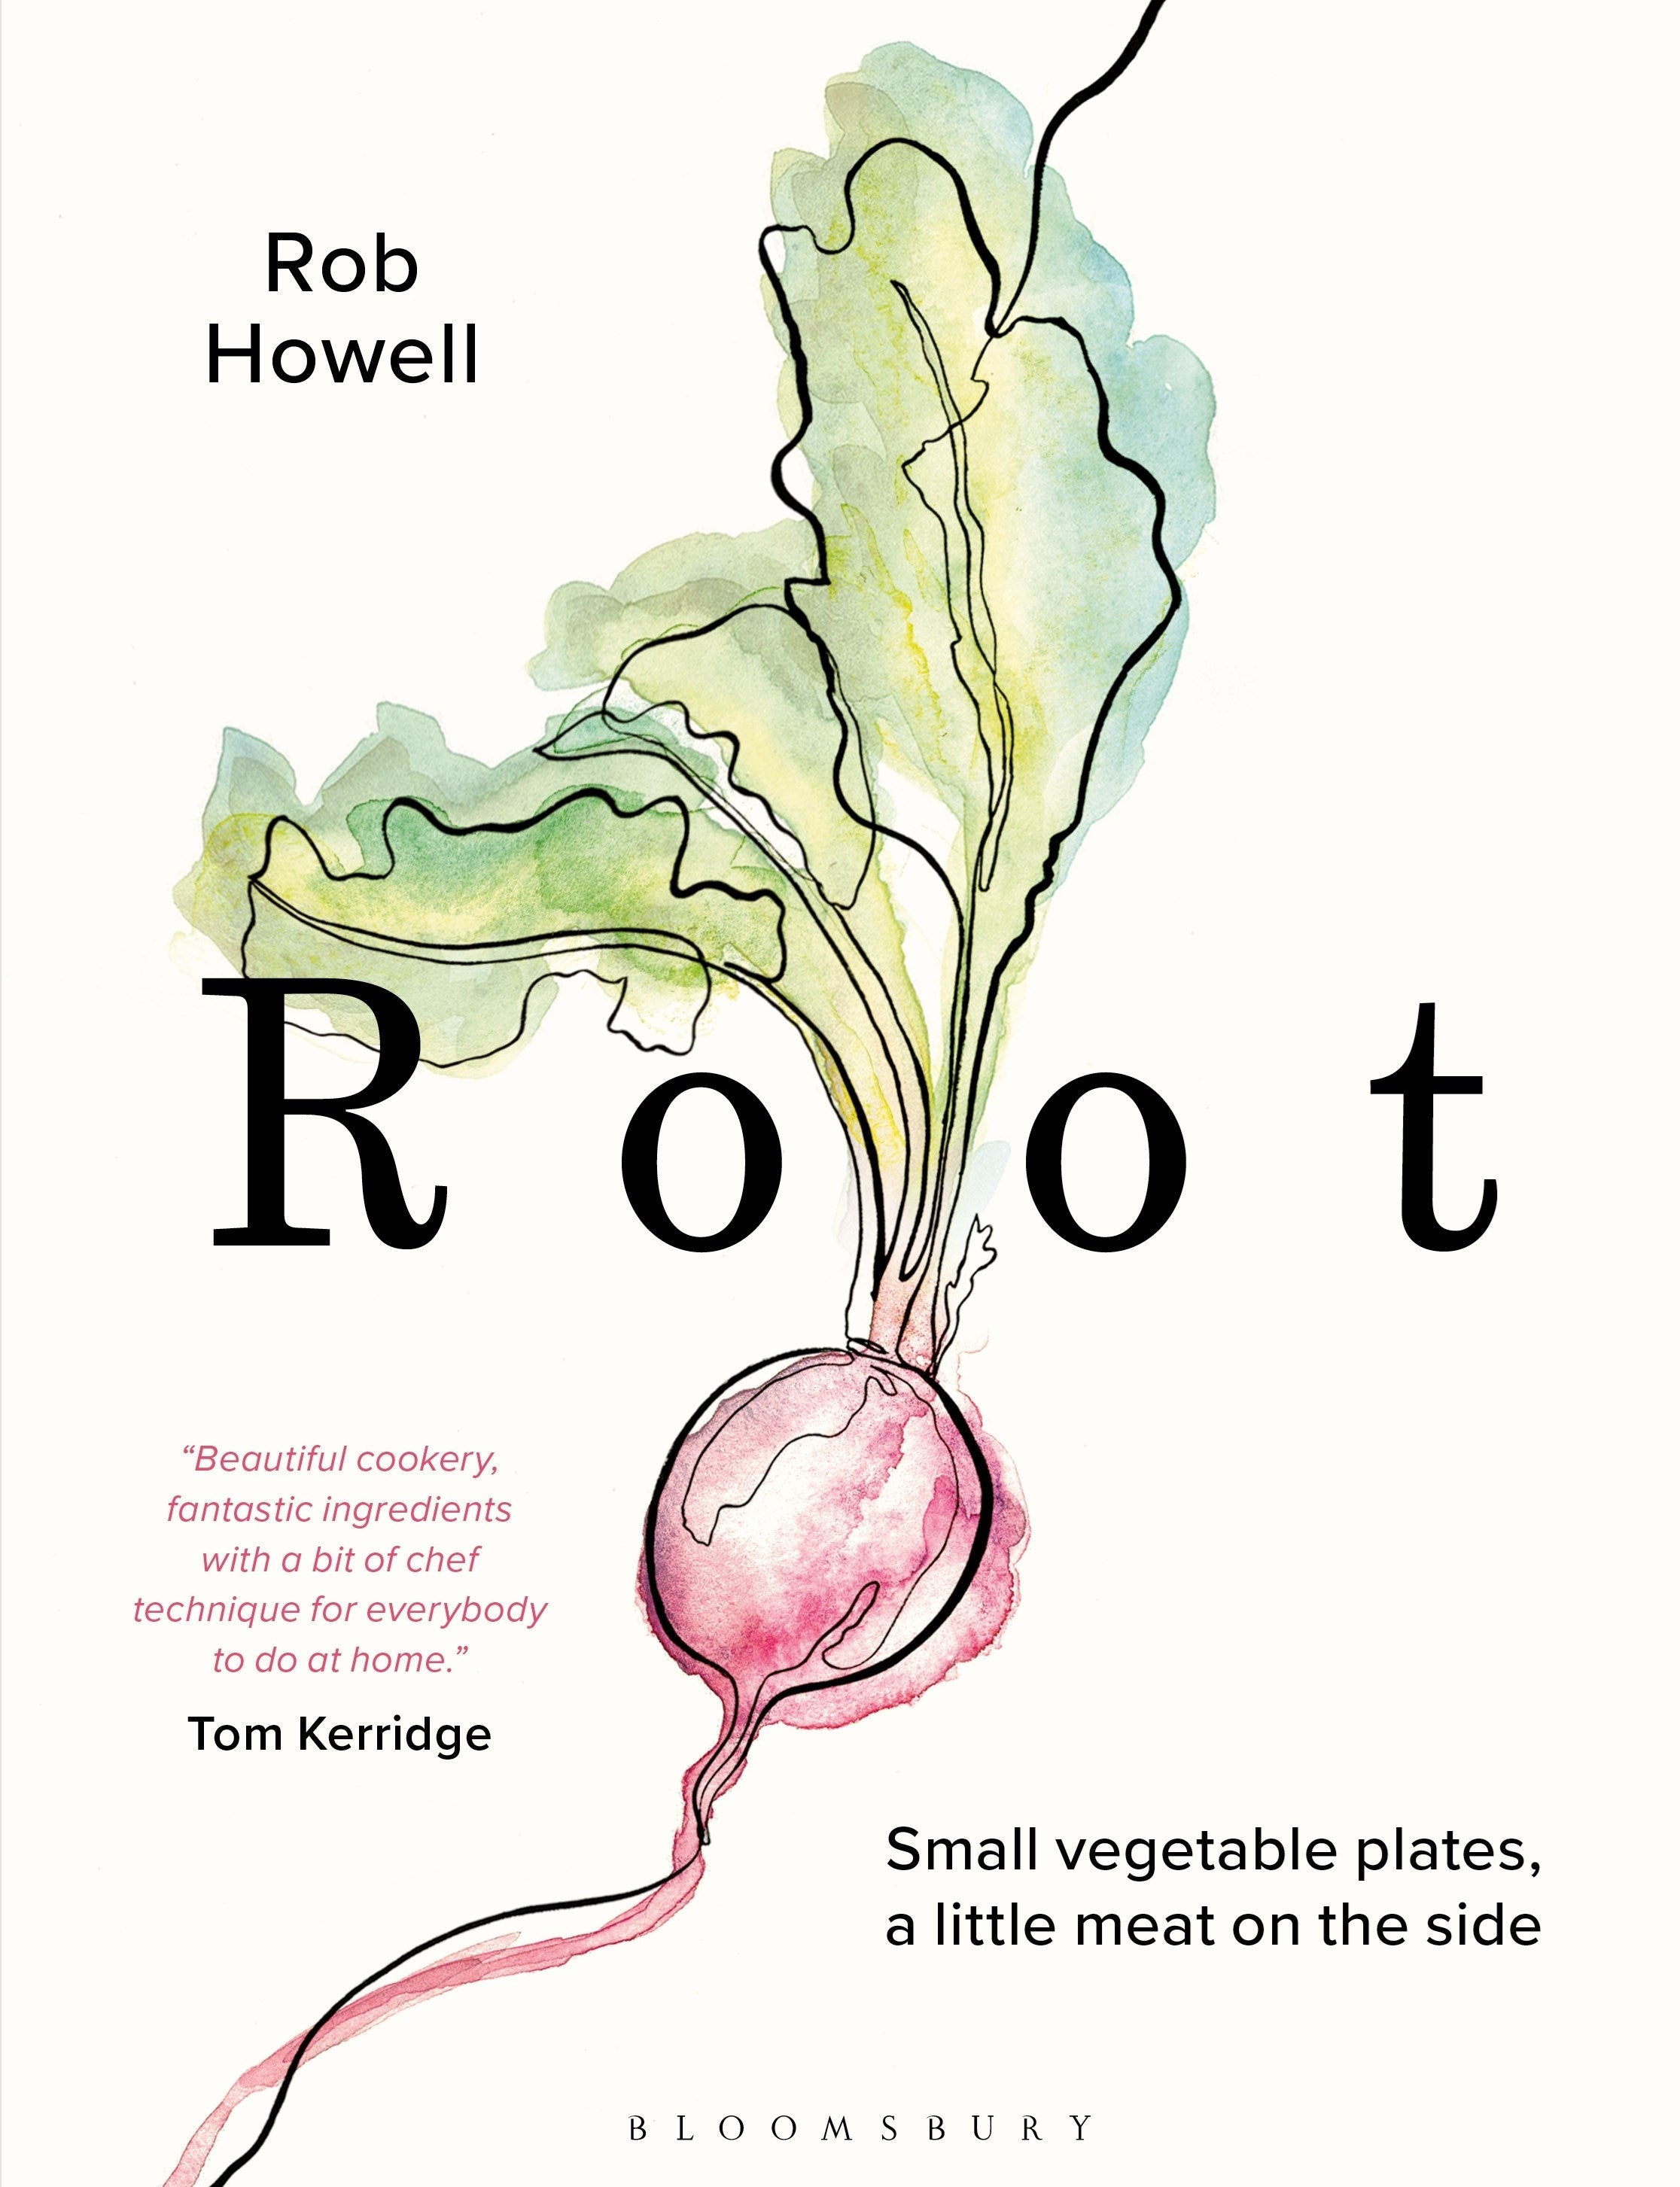 Root: Small vegetable plates, a little meat on the side